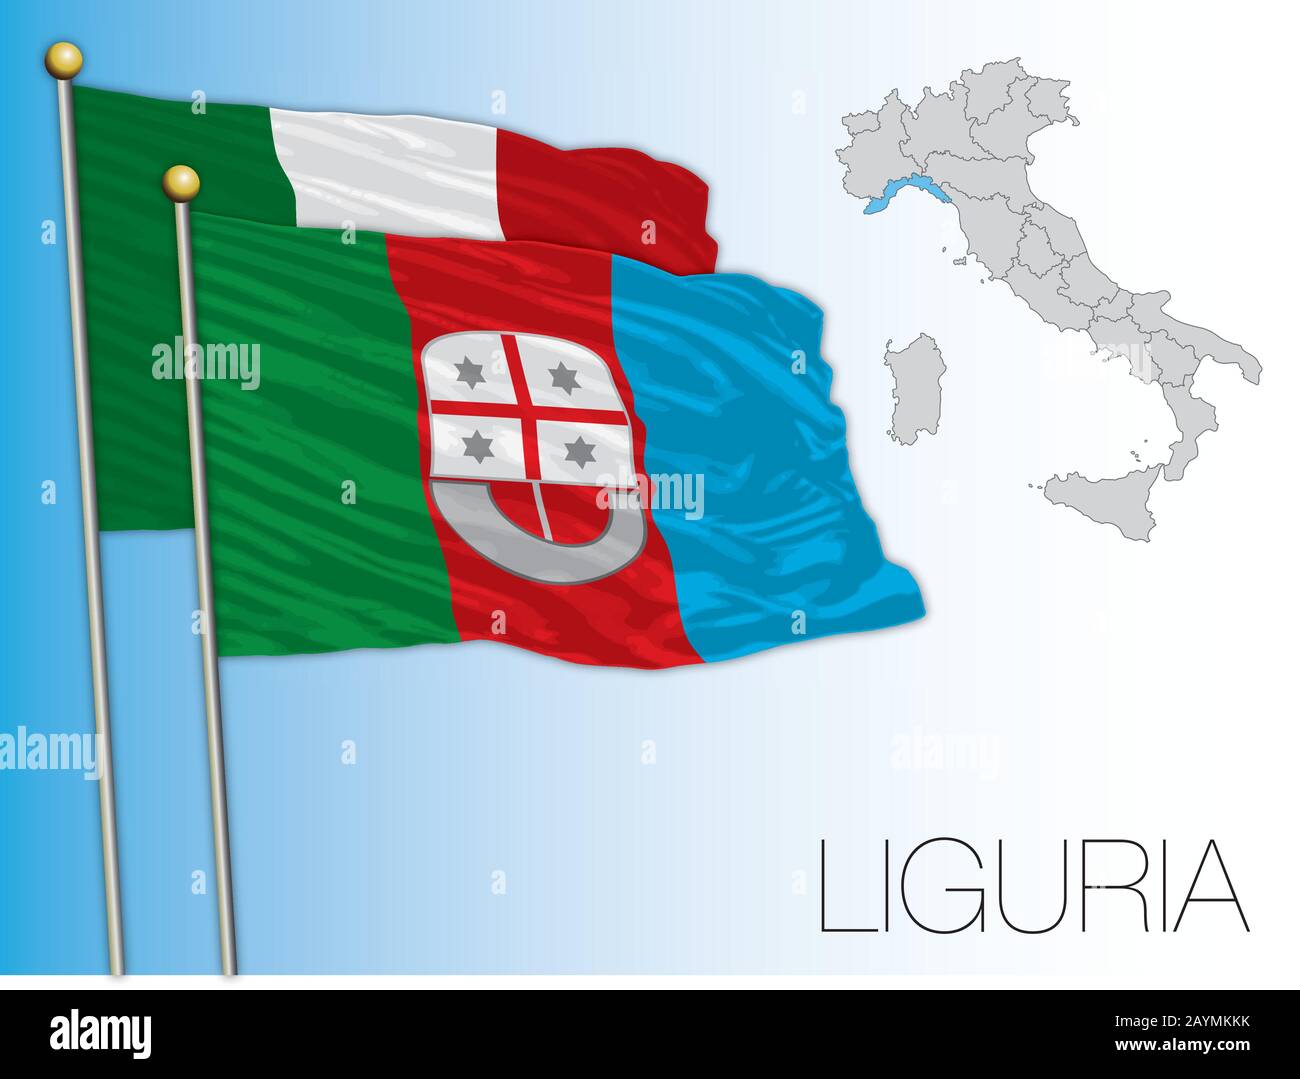 Liguria official regional flag and map, Italy, vector illustration Stock Vector